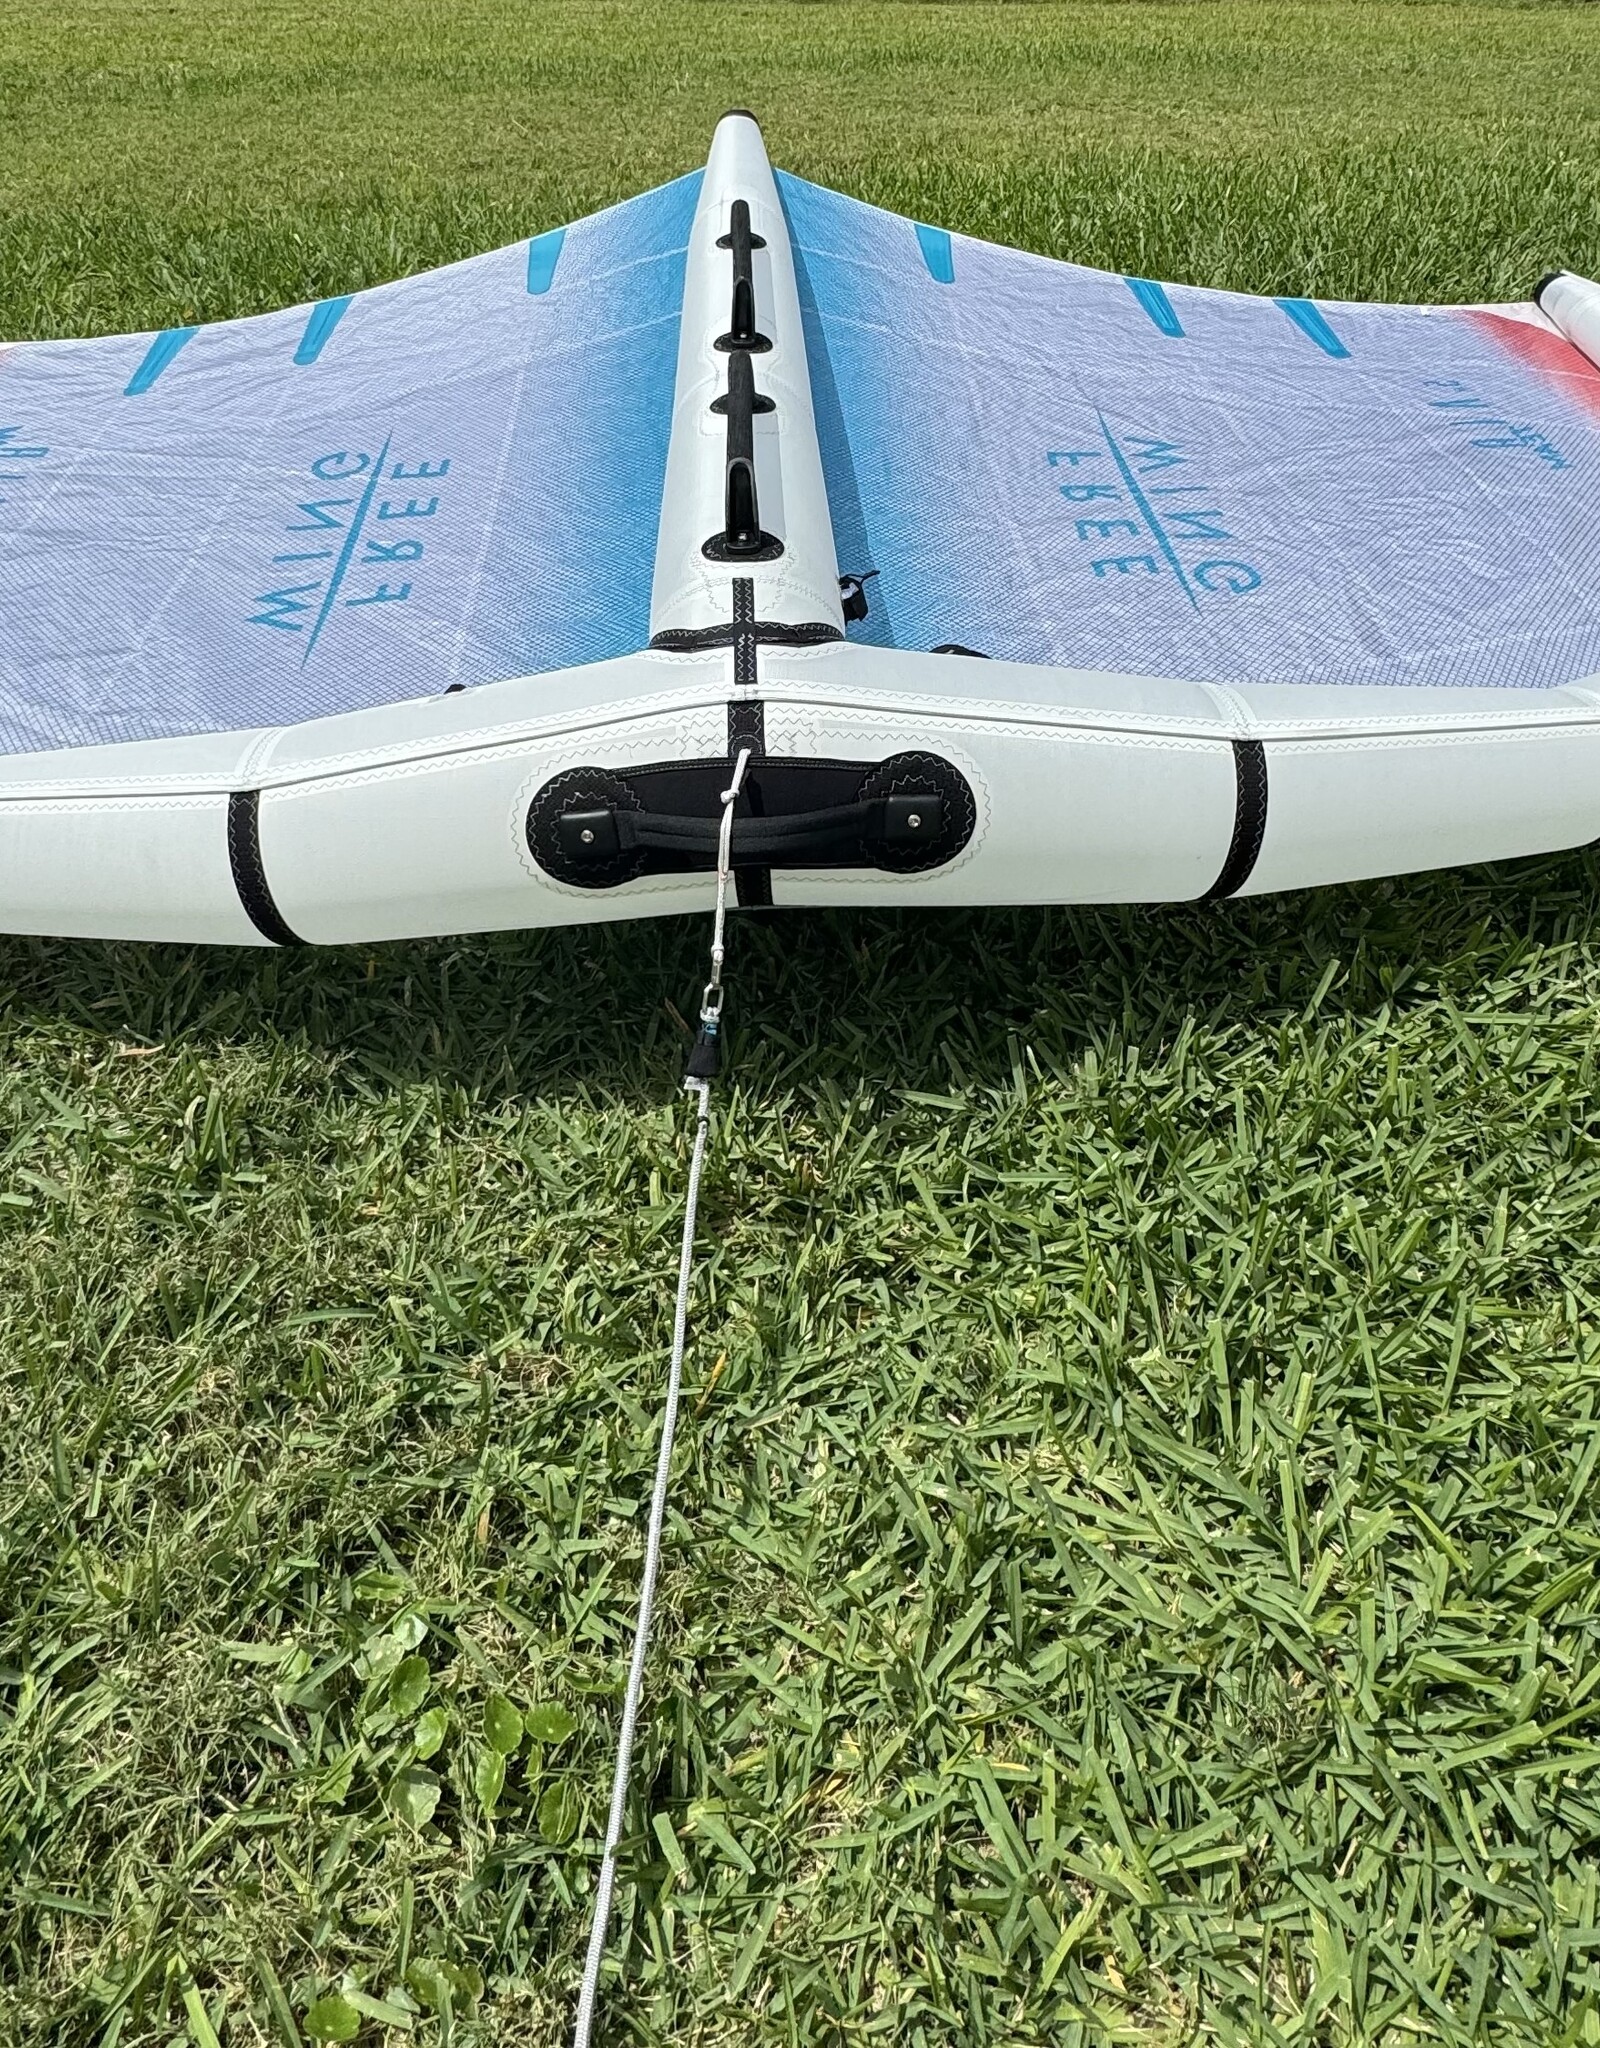 FREEWING FREEWING AIR TEAM 4.5M ULTRA X CANOPY AND HO'OKIPA AIRFRAME